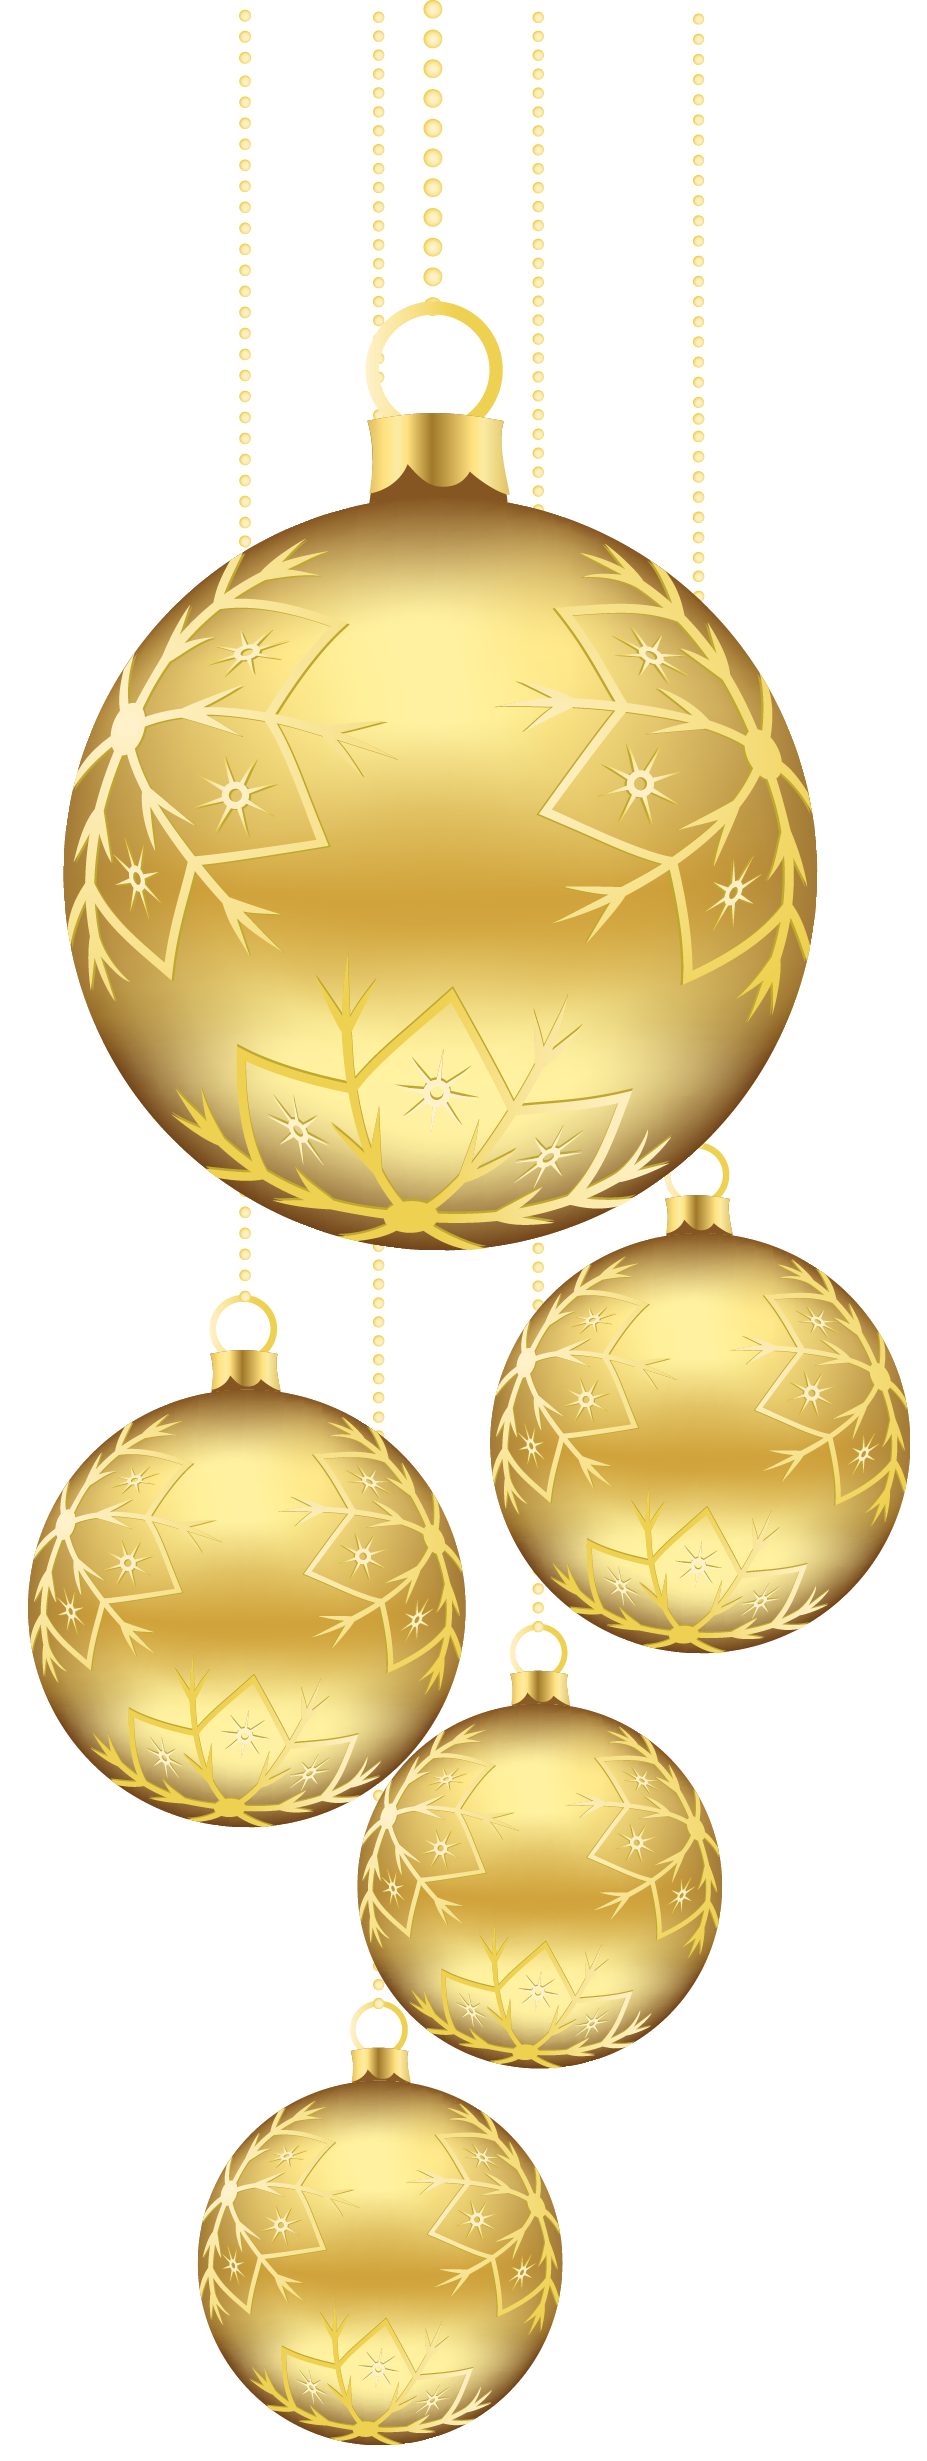 Christmas Gold Bauble Free Photo PNG Image